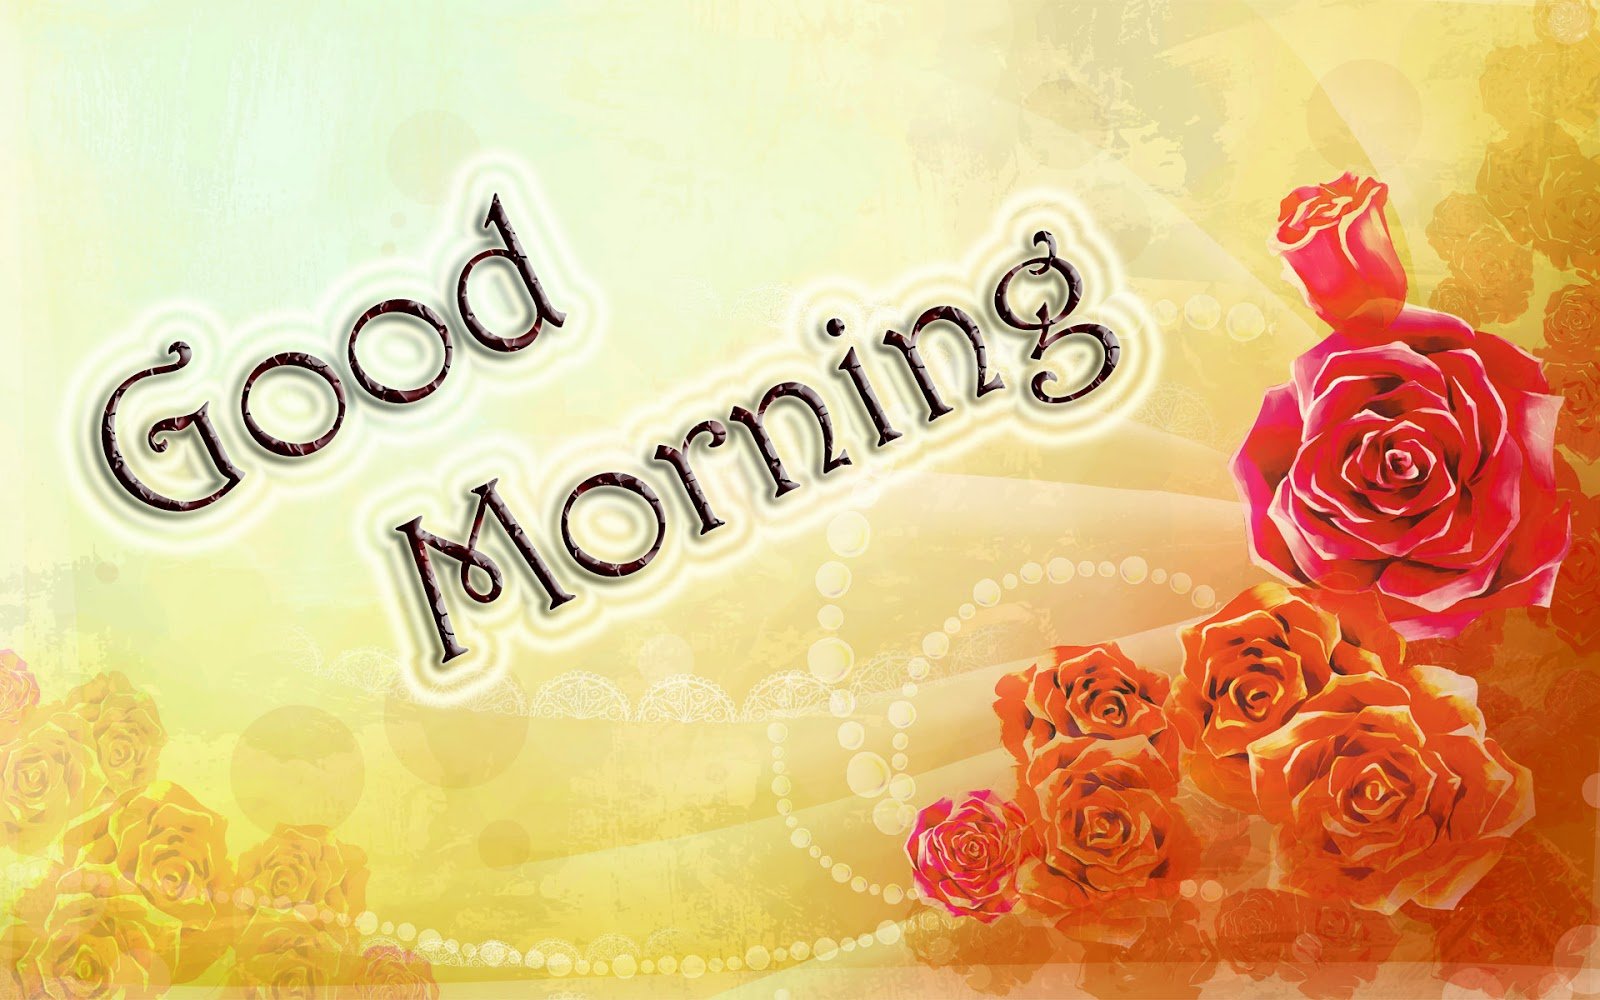 Lovely and Beautiful Good Morning Wallpapers